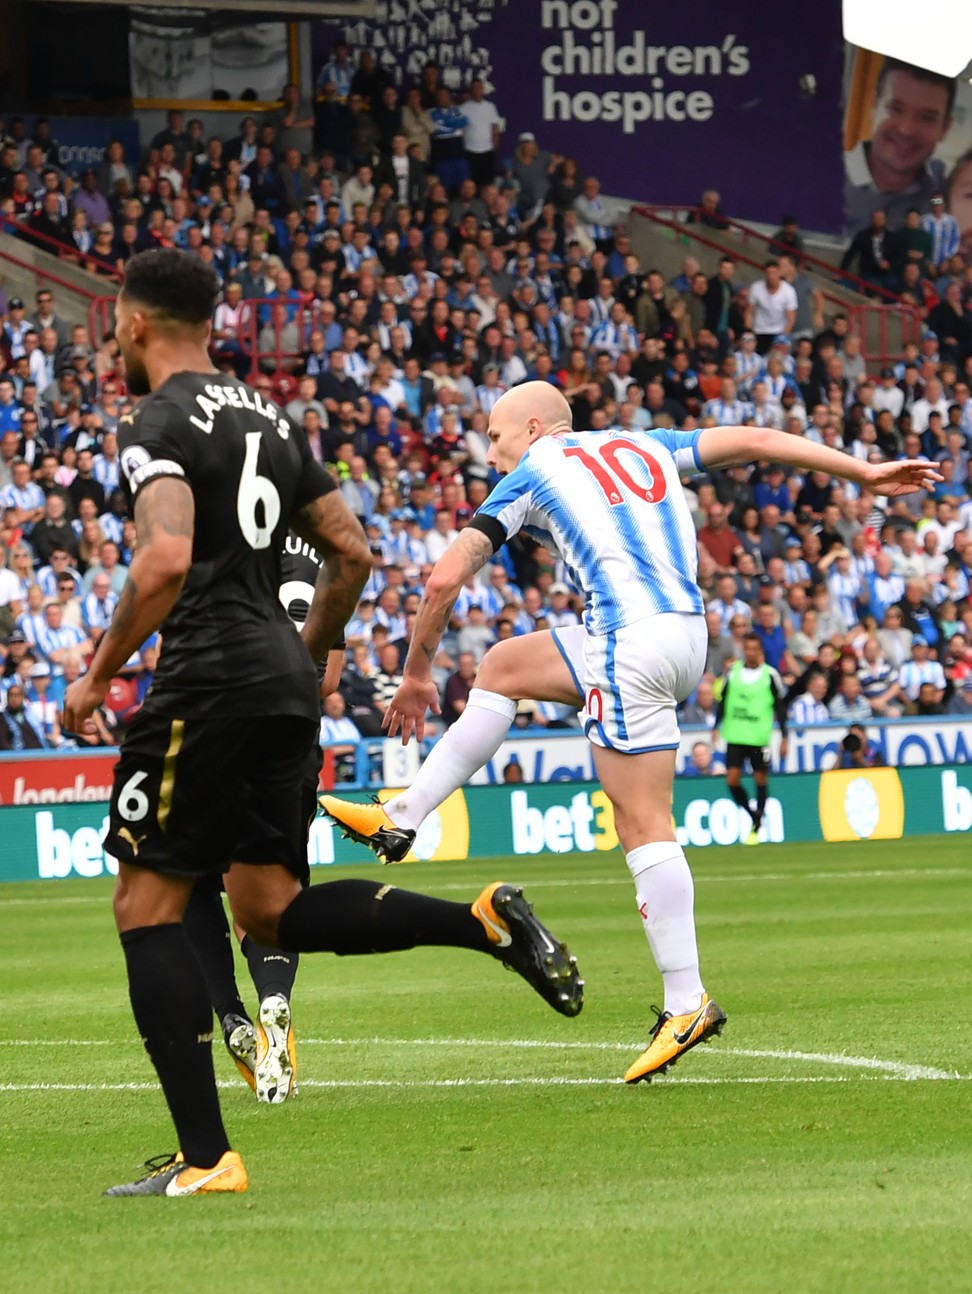 Huddersfield Town’s Australian midfielder Aaron Mooy (right) scores against Newcastle United. Photo: AFP